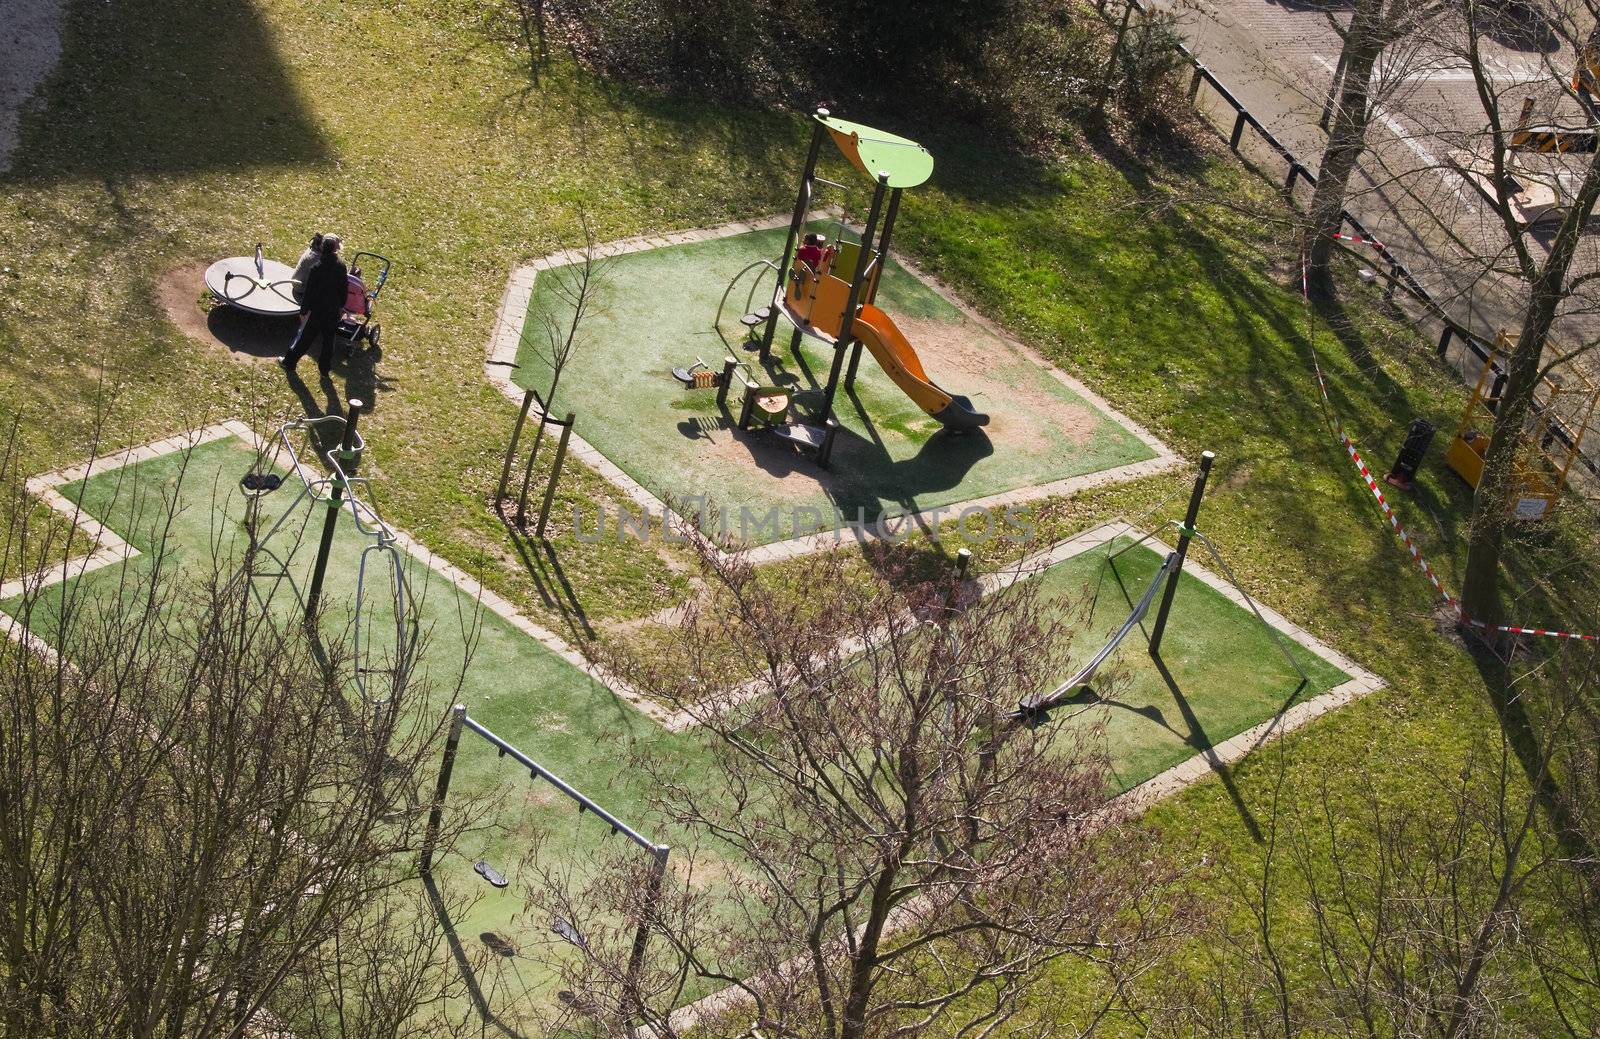 Playground for children as seen from above by Colette